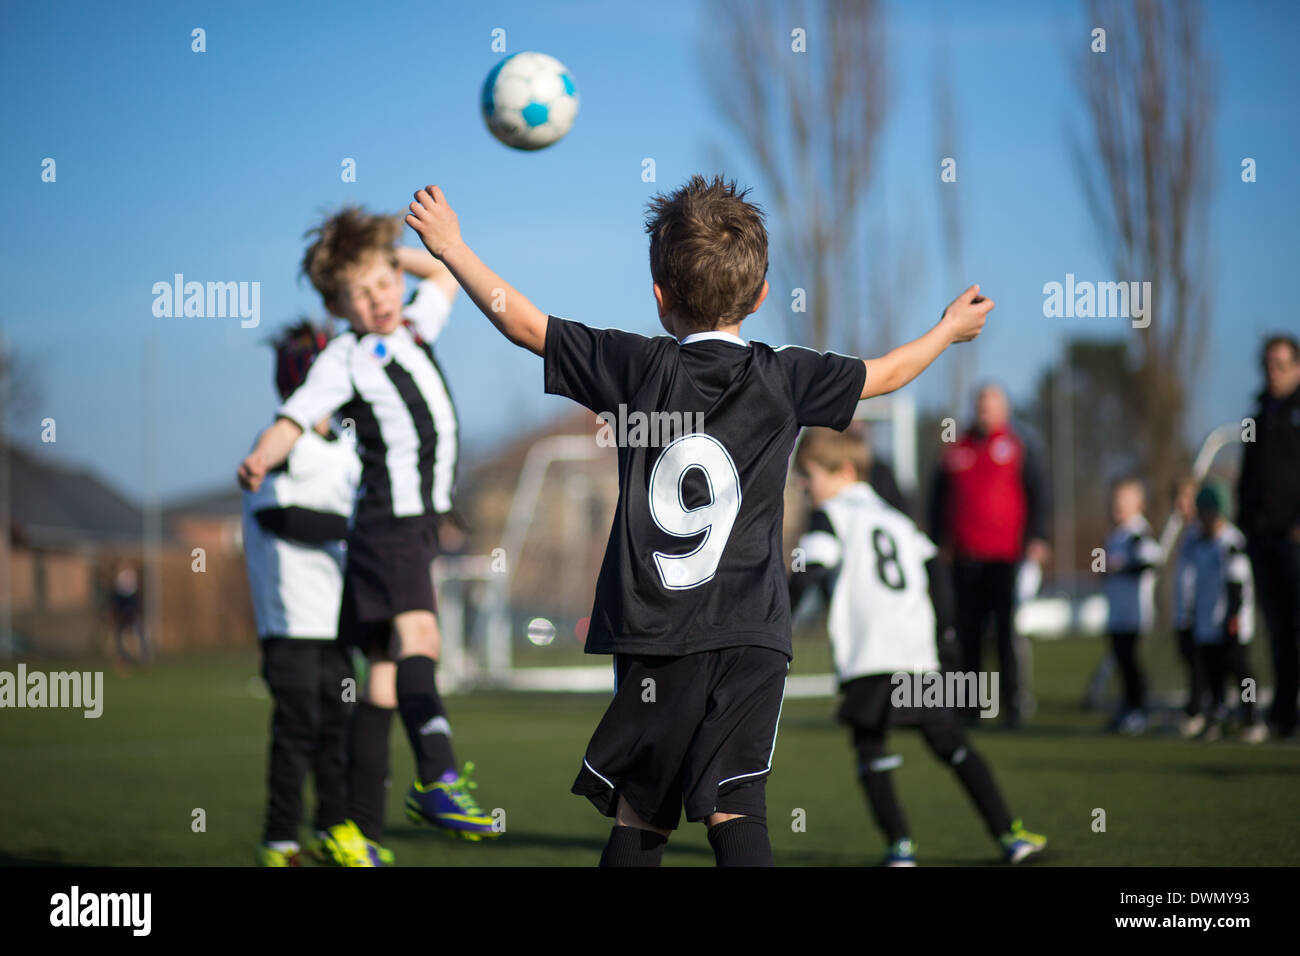 Action during a boys soccer match. Trademarks have been removed. Stock Photo